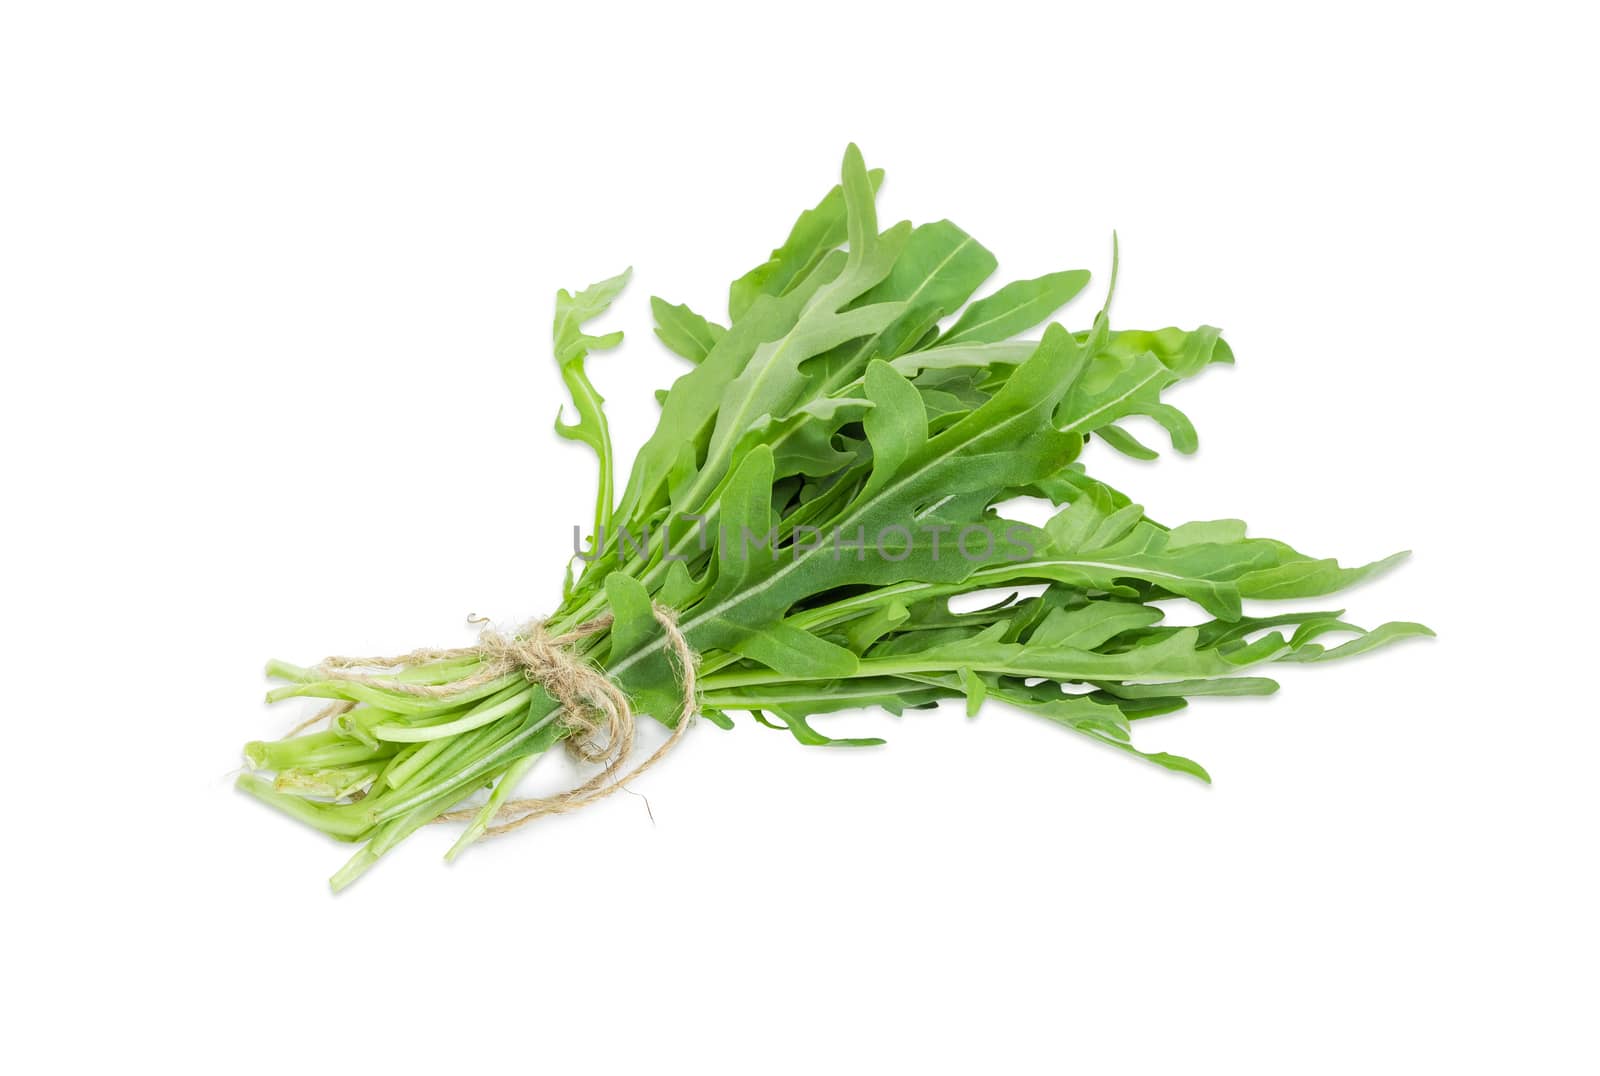 Bundle of the fresh green leaves of the arugula tied with twine on a light background
